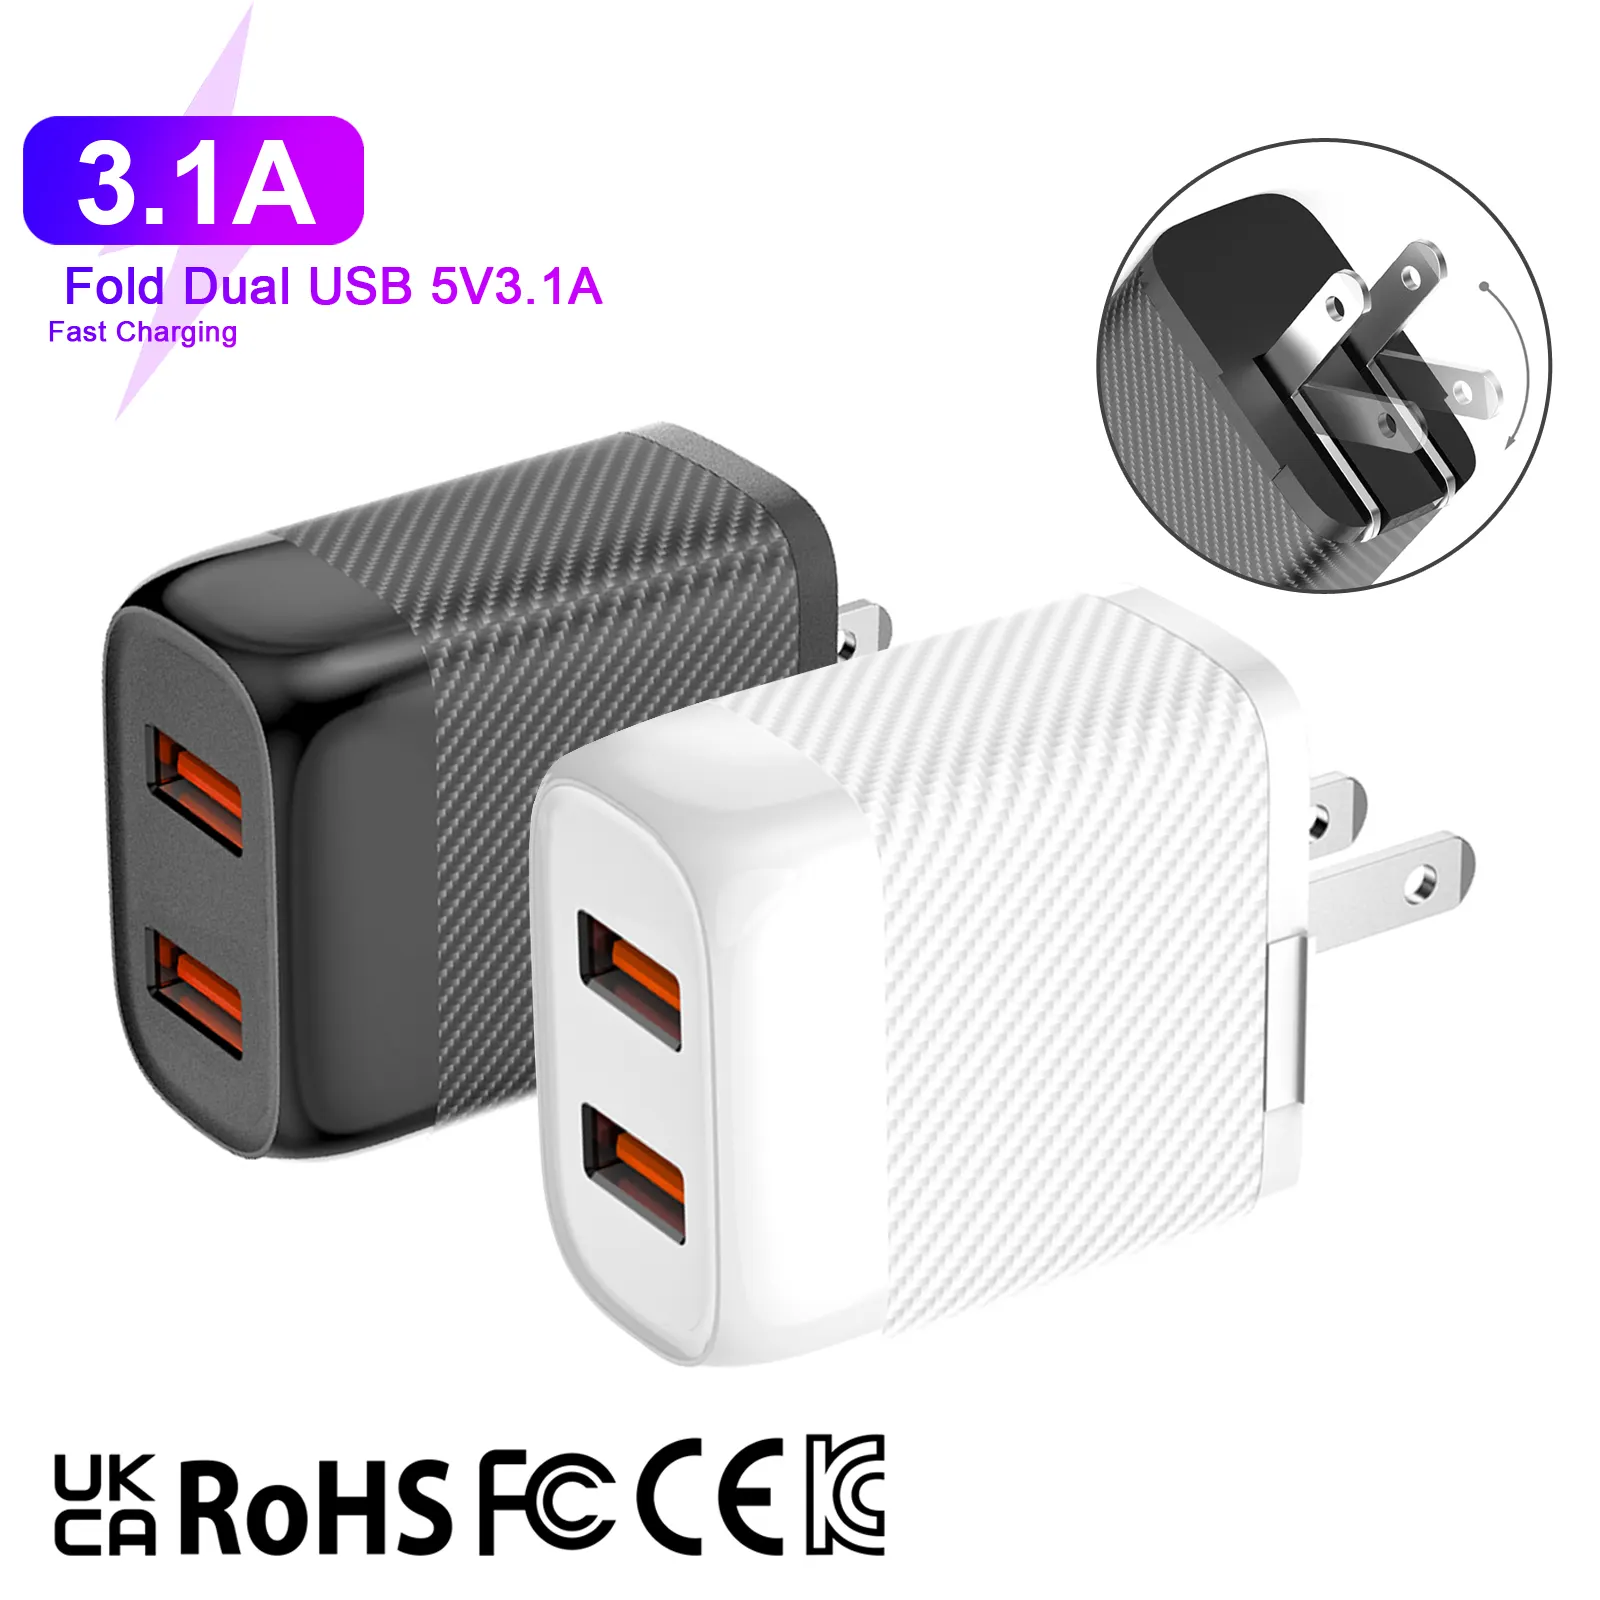 UK EU US Version USB Wall Charger For Samsung Galaxy S10 S9 S8 Edge Note 10 S22 Travel Adapter Charger Plug